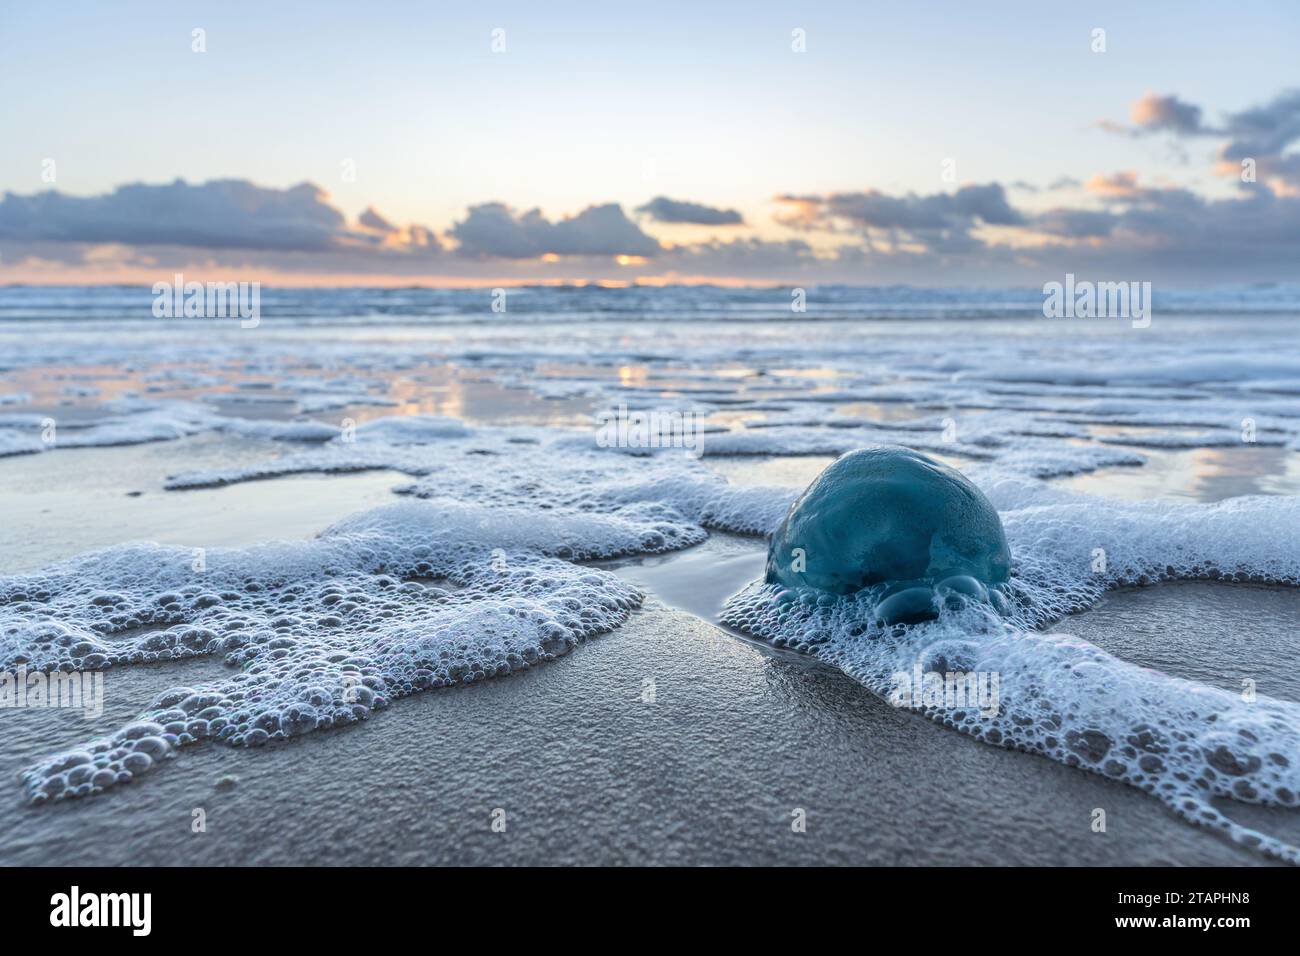 dead blue cabbage bleb (Rhizostoma octopus) stranded on the beach Stock Photo